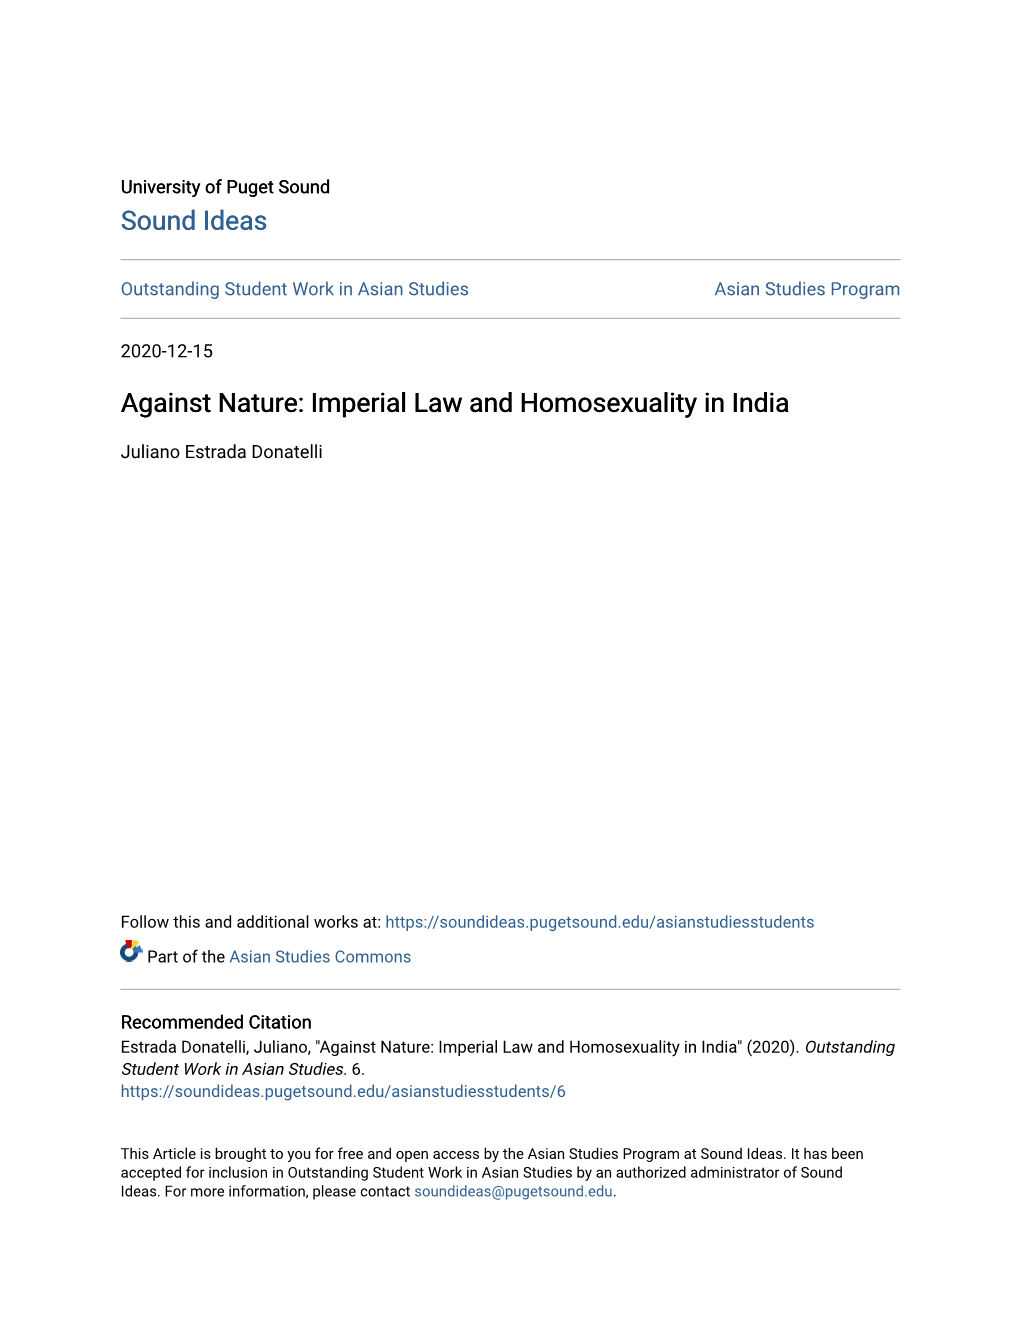 Against Nature: Imperial Law and Homosexuality in India